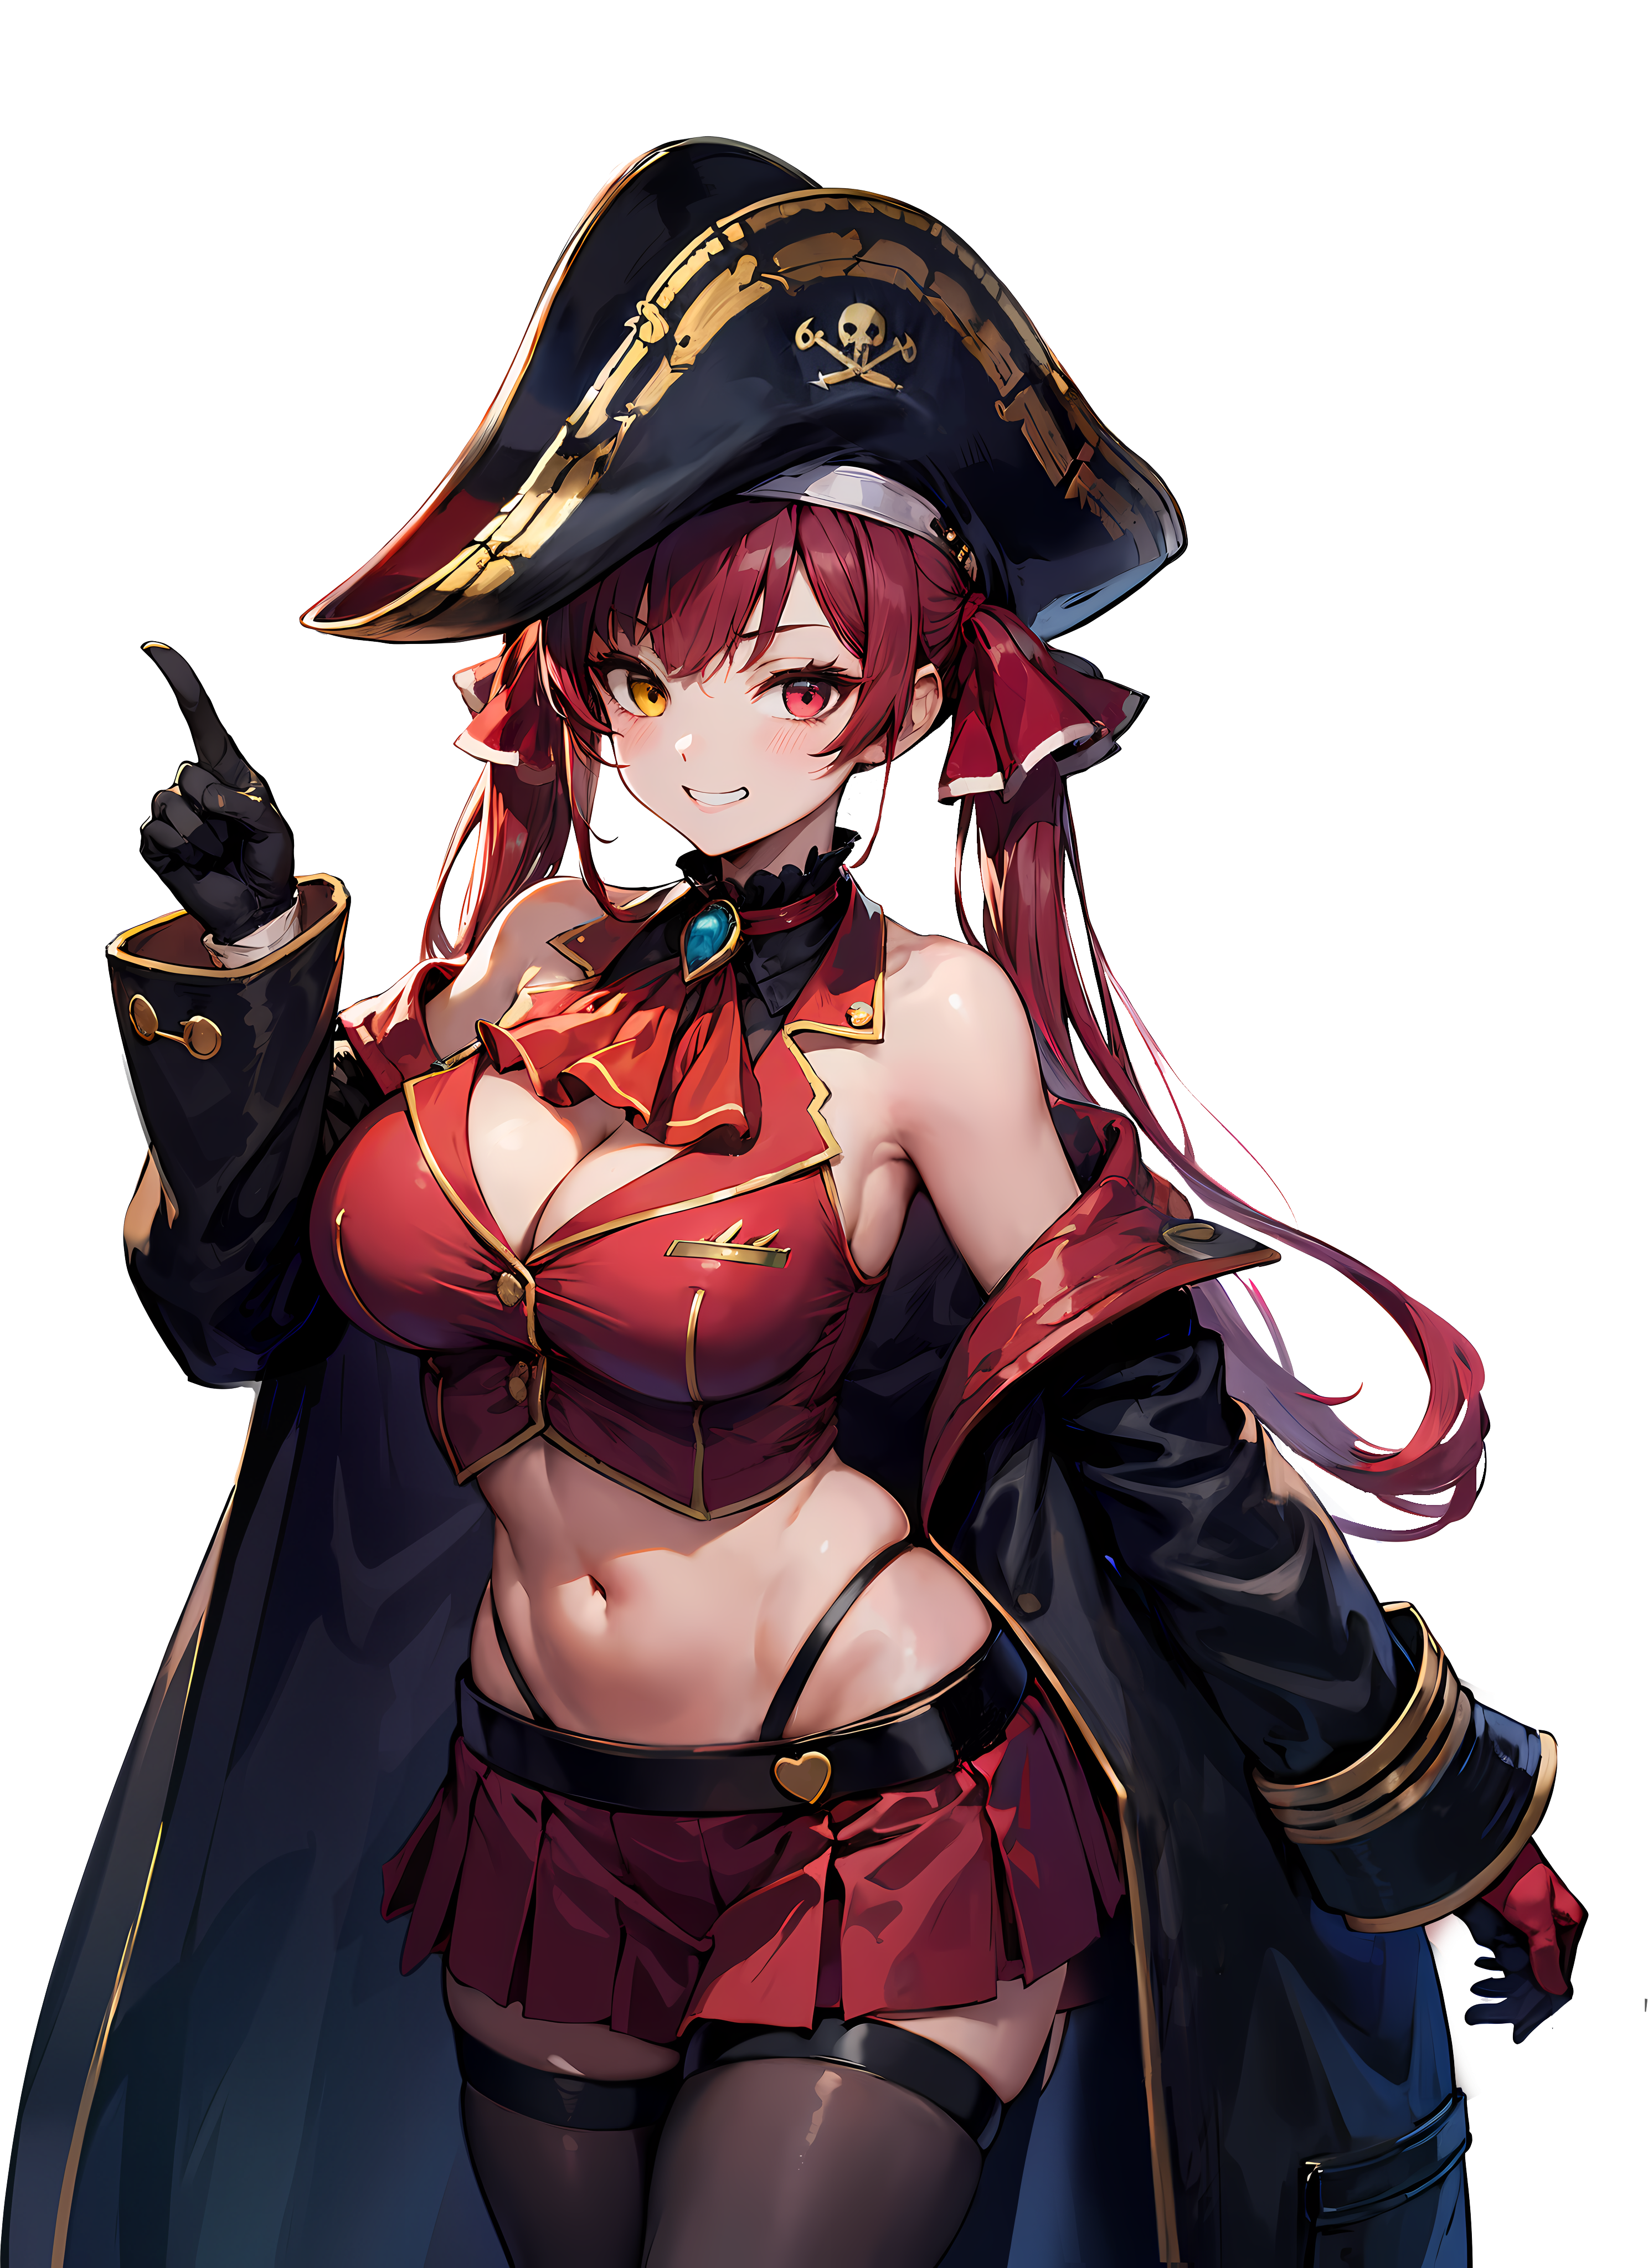 Vtuber,Female,Comedy,Captain of the Houshou Pirates and Hololive Fantasy VTuber. Spend another day at sea, dealing with all of the usual things that she puts you through.